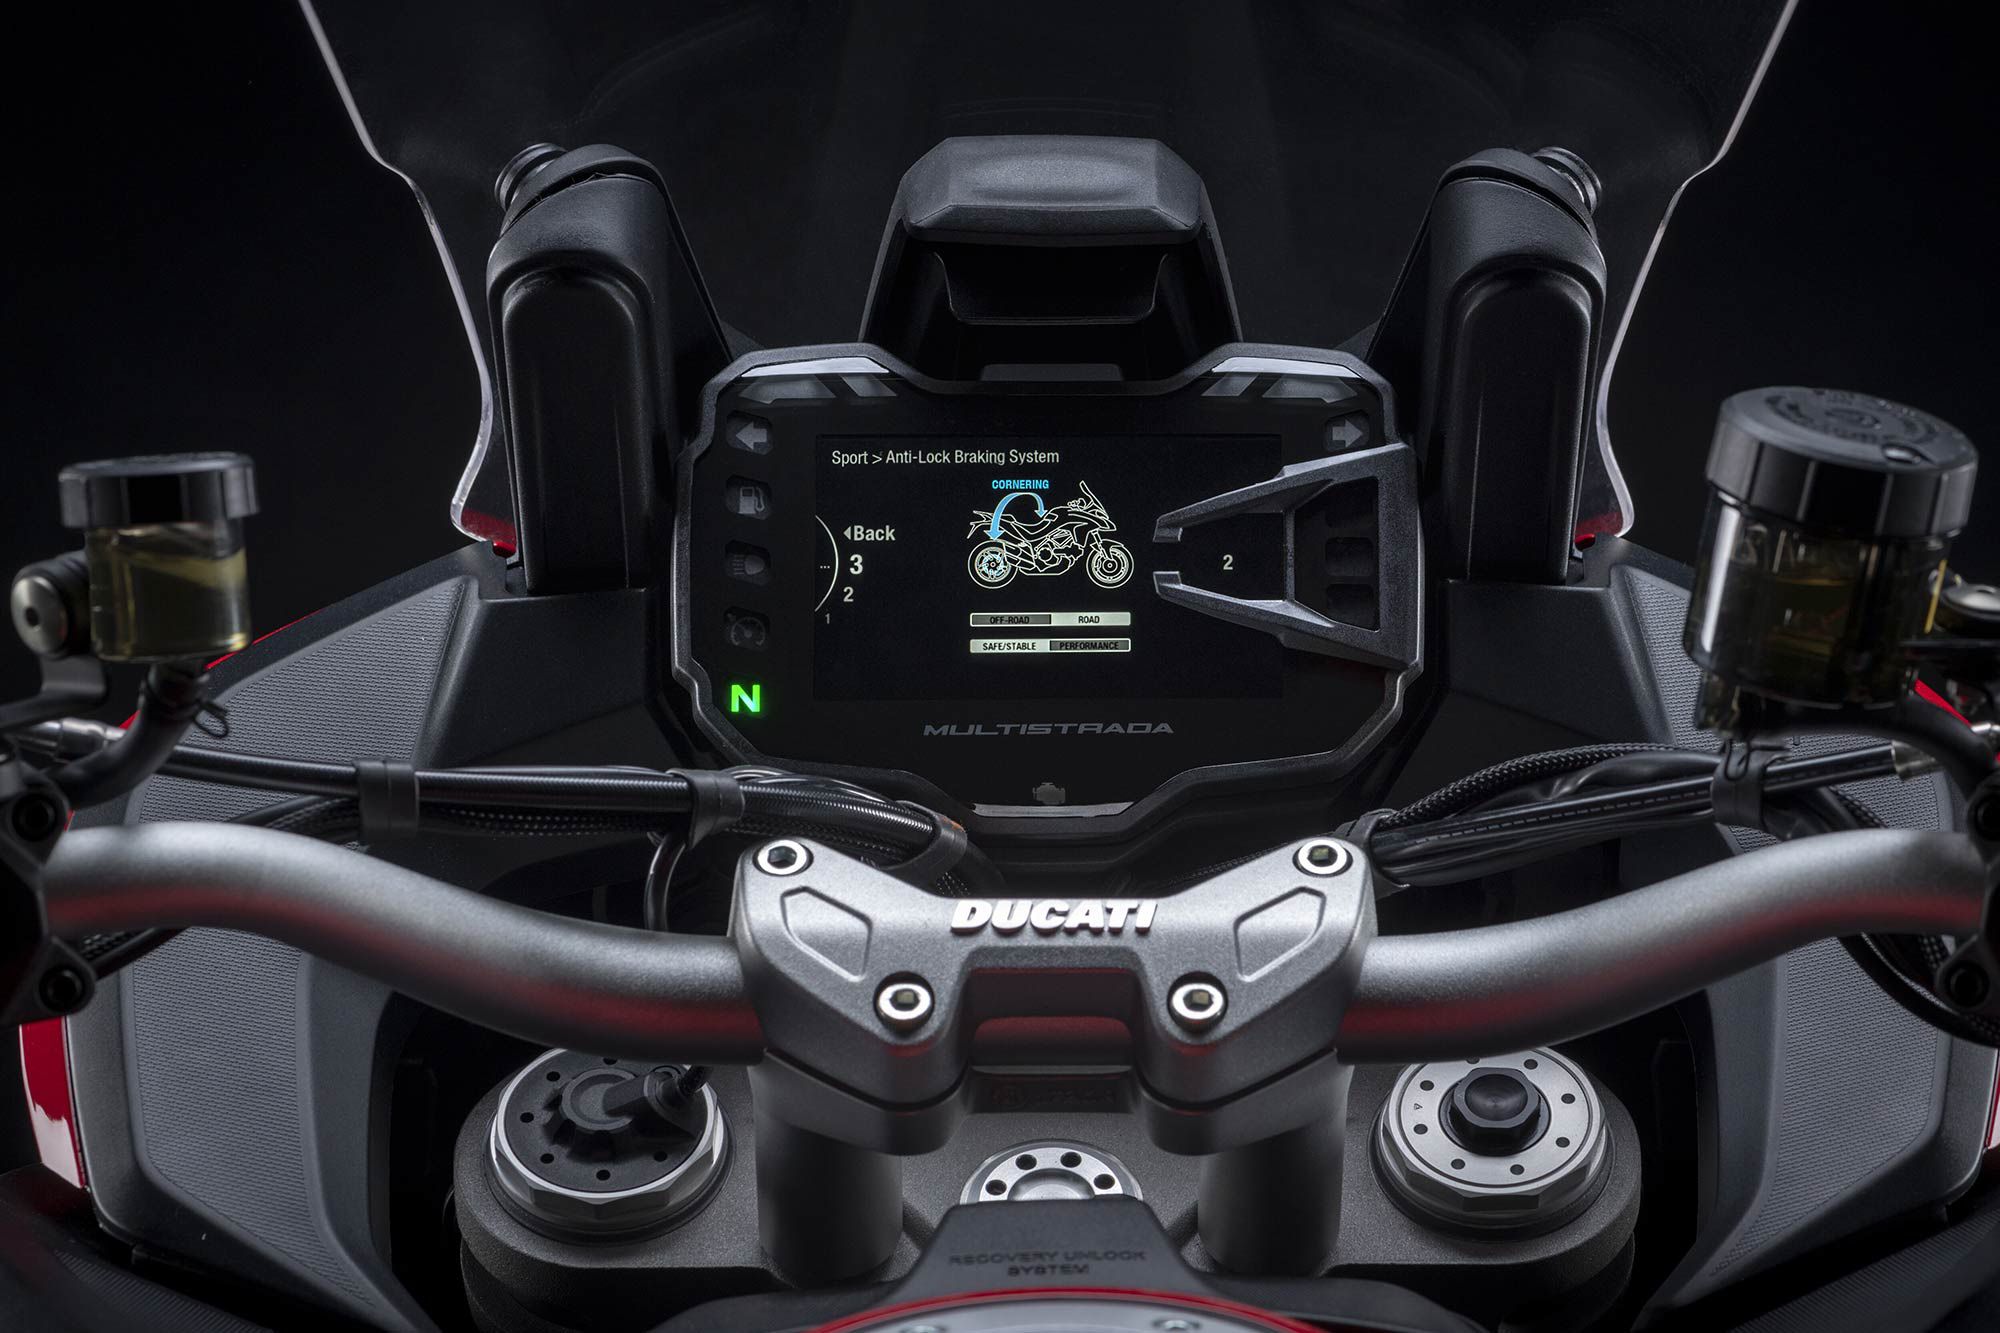 The V2 S comes with a 5-inch color TFT instrument panel.